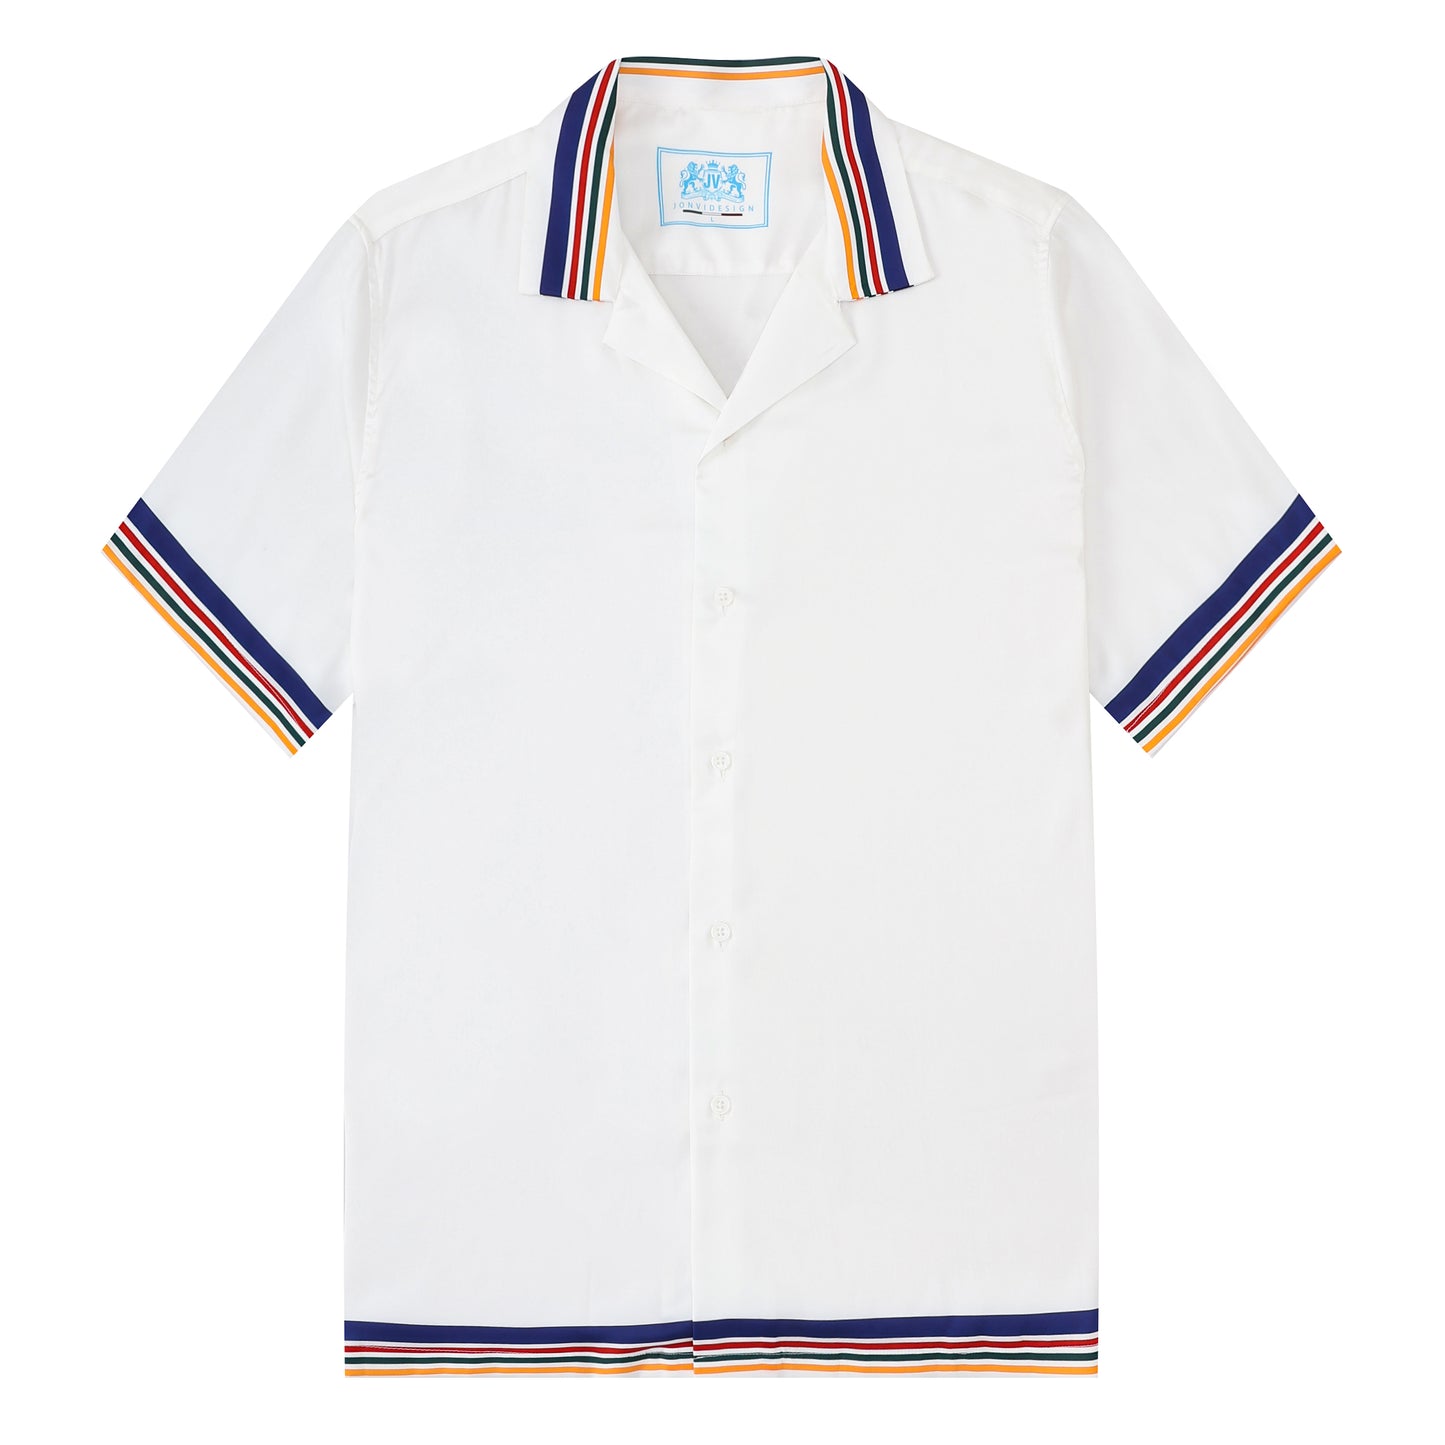 Western Architecture Camp Collar Casual Tennis Shirt